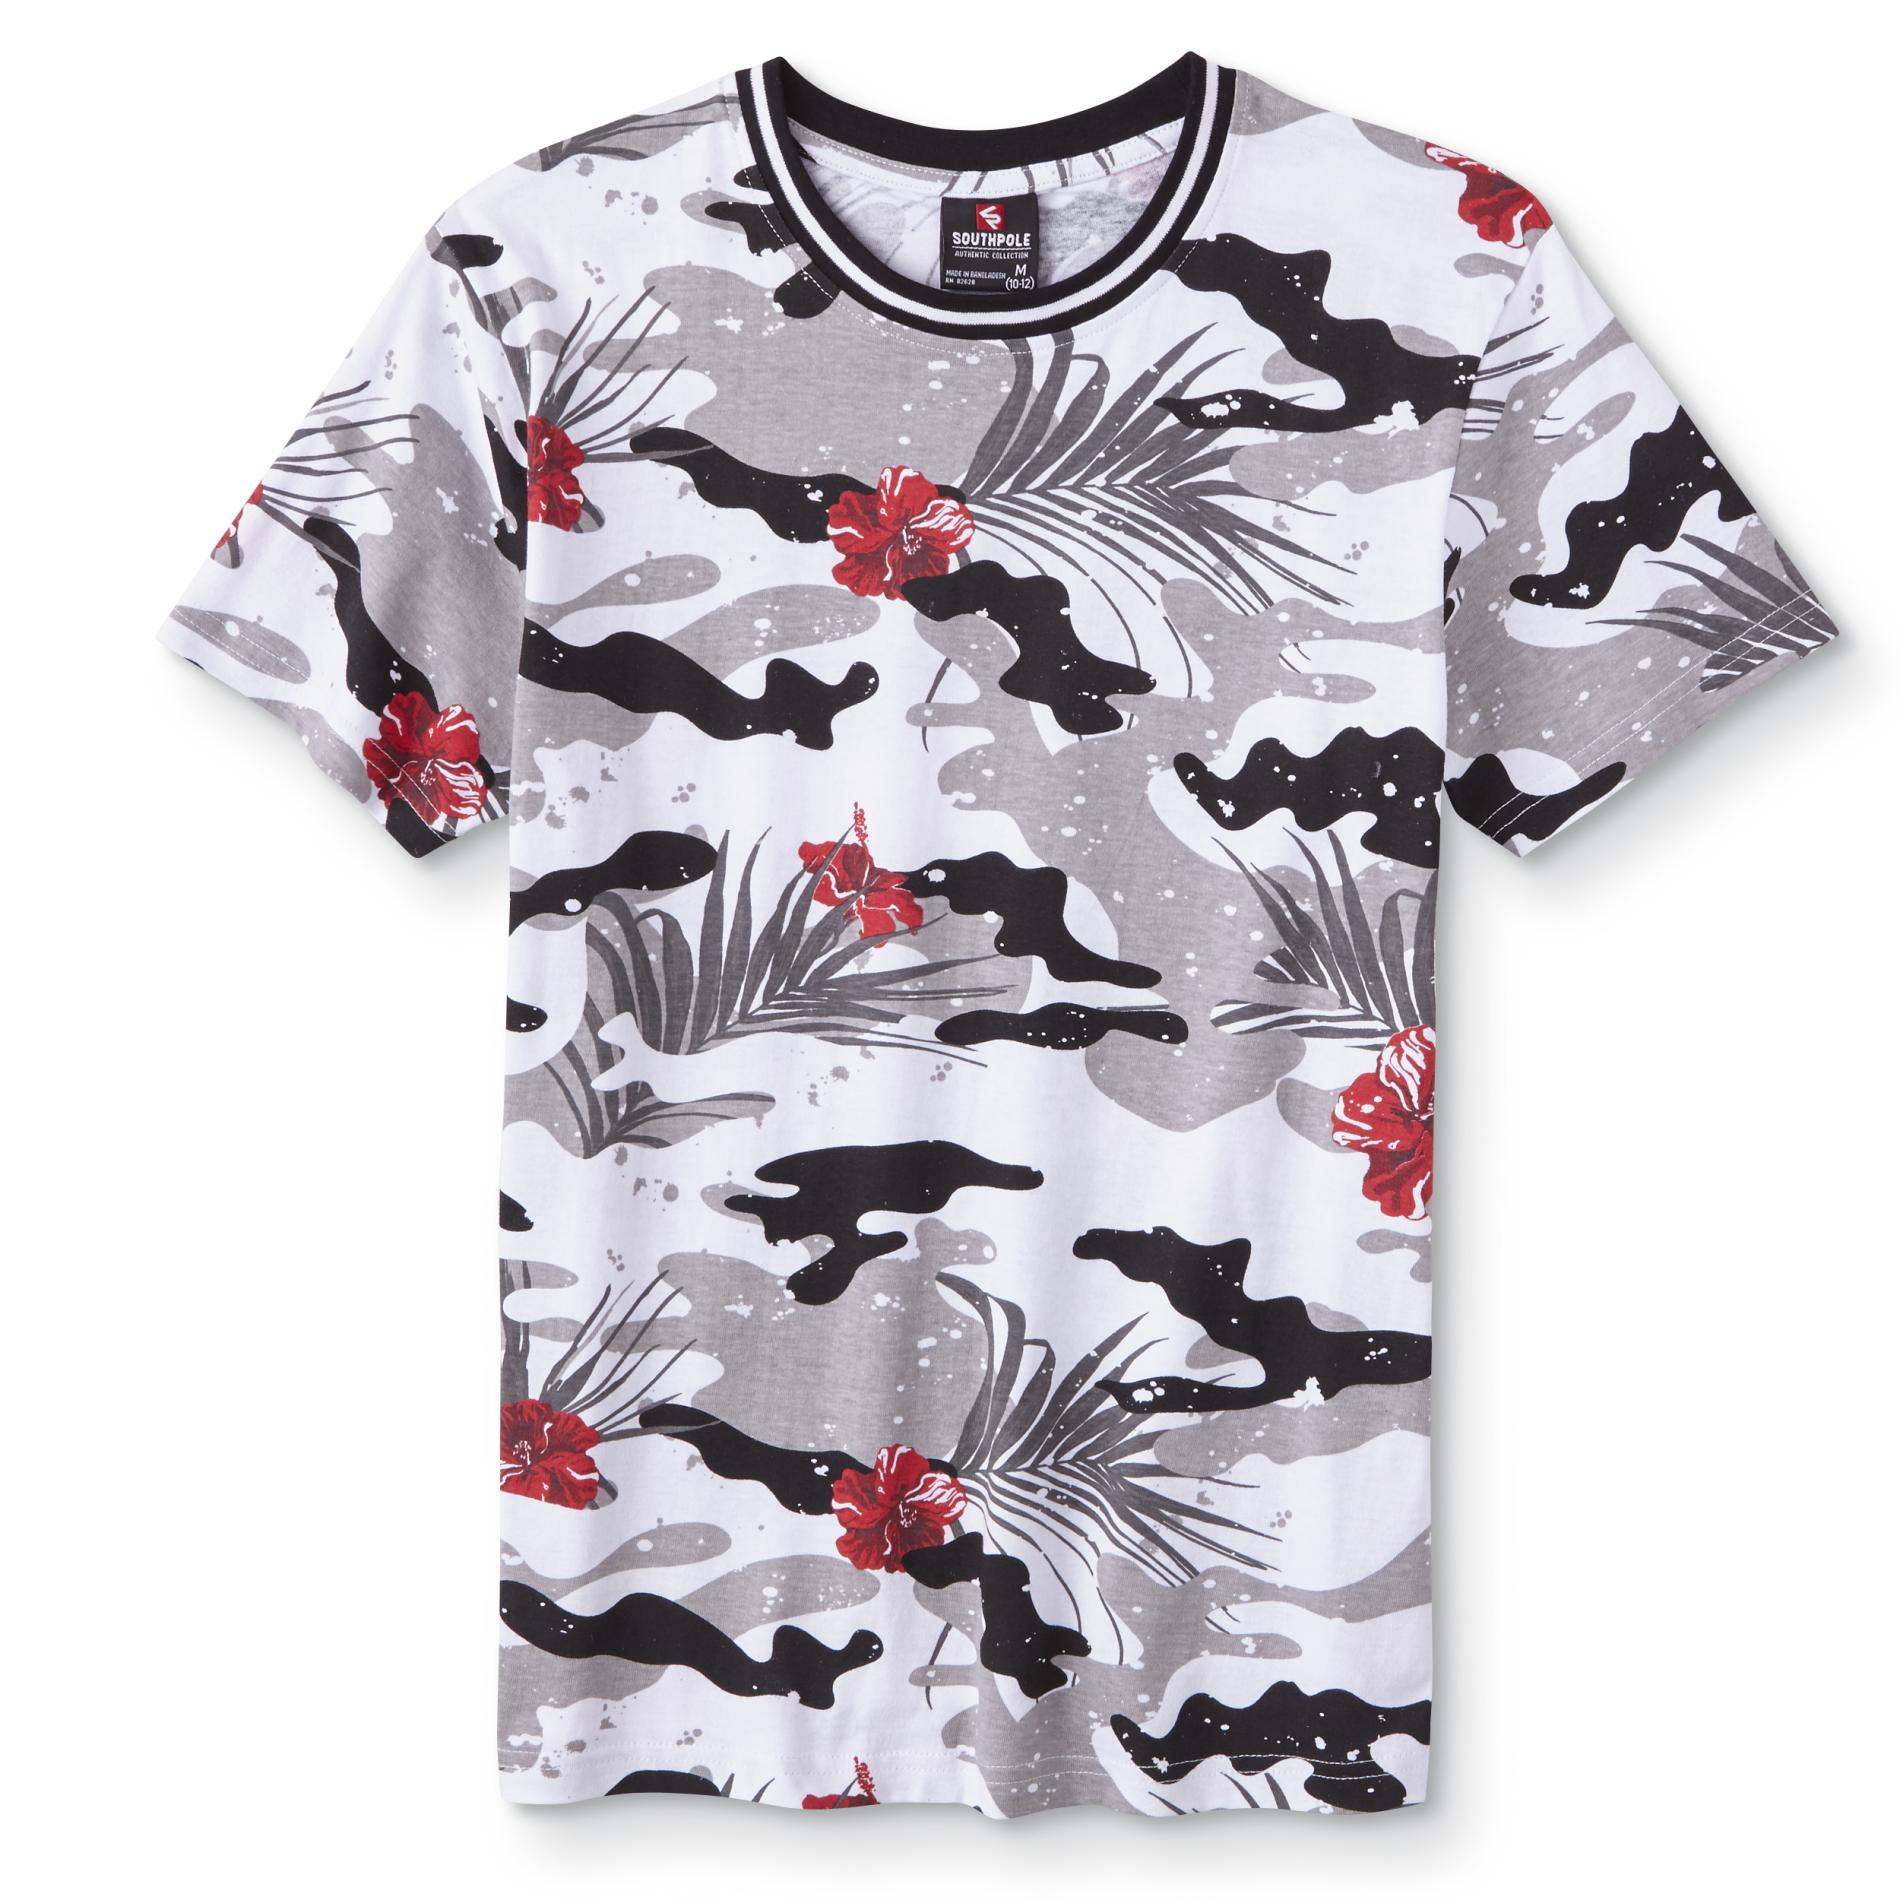 Southpole Boys' Graphic T-Shirt - Floral Camouflage